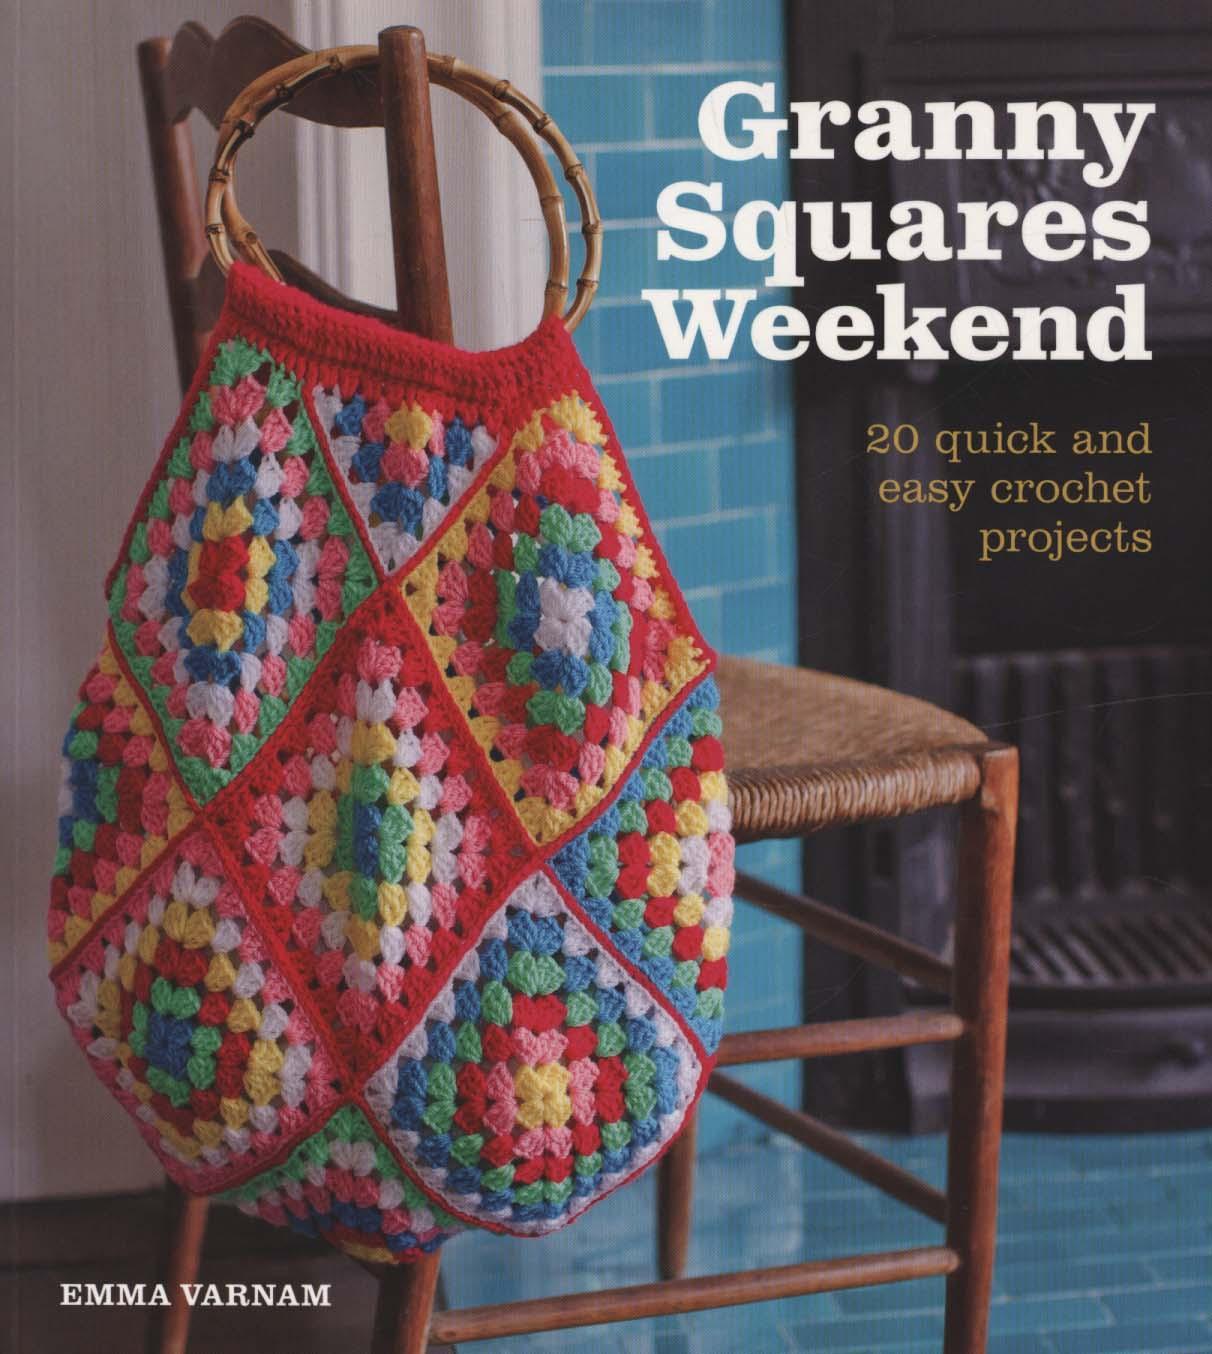 Granny Squares Weekend